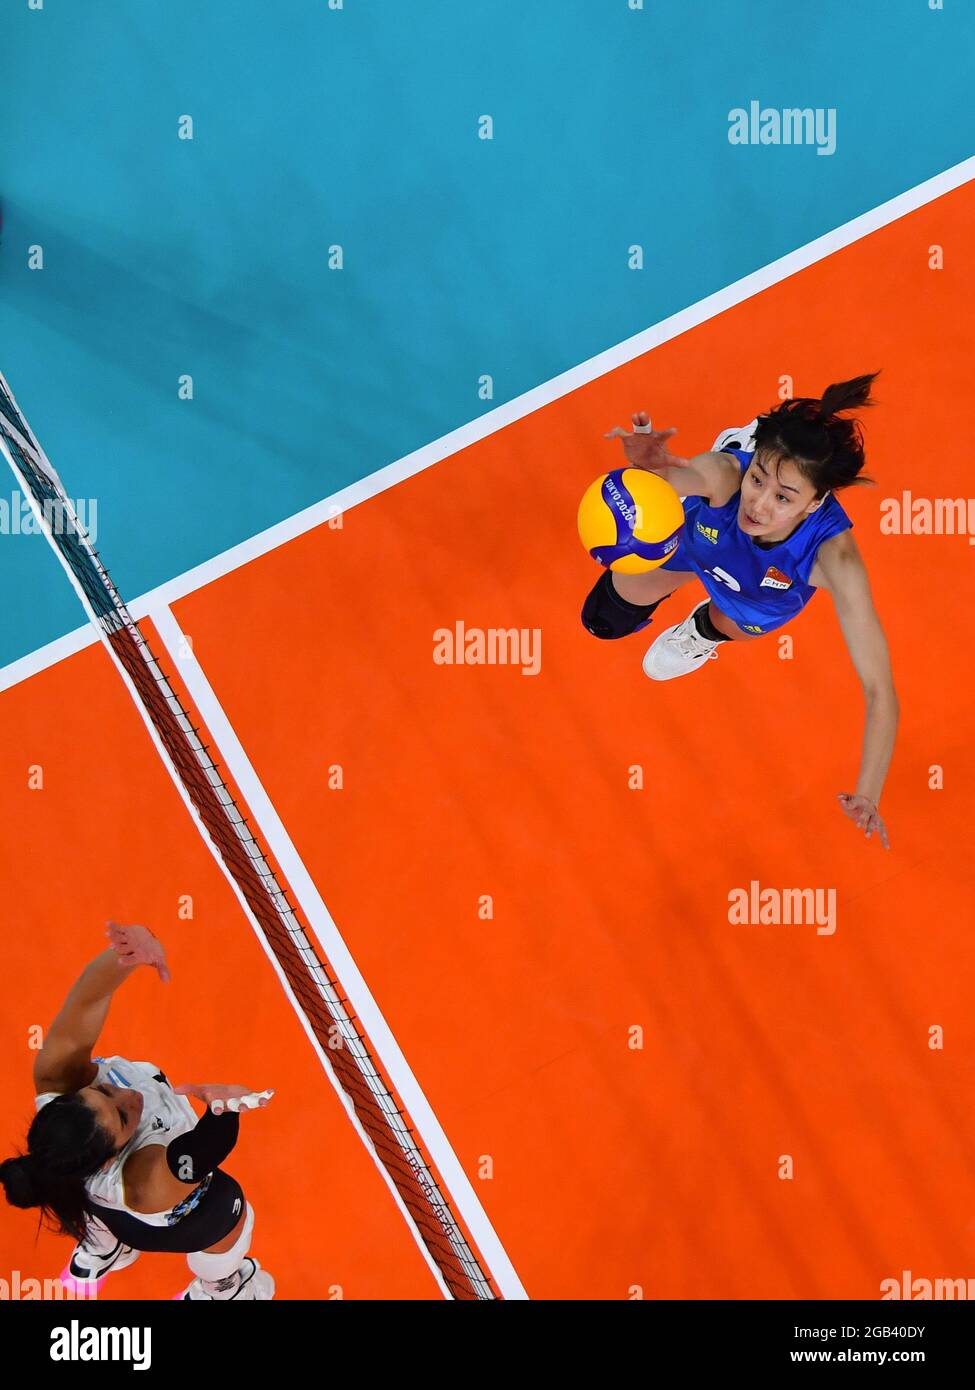 Tokyo, Japan. 2nd Aug, 2021. Wang Yuanyuan (R) of China competes during the women's volleyball preliminary match between China and Argentina at the Tokyo 2020 Olympic Games in Tokyo, Japan, Aug. 2, 2021. Credit: Chen Yichen/Xinhua/Alamy Live News Stock Photo